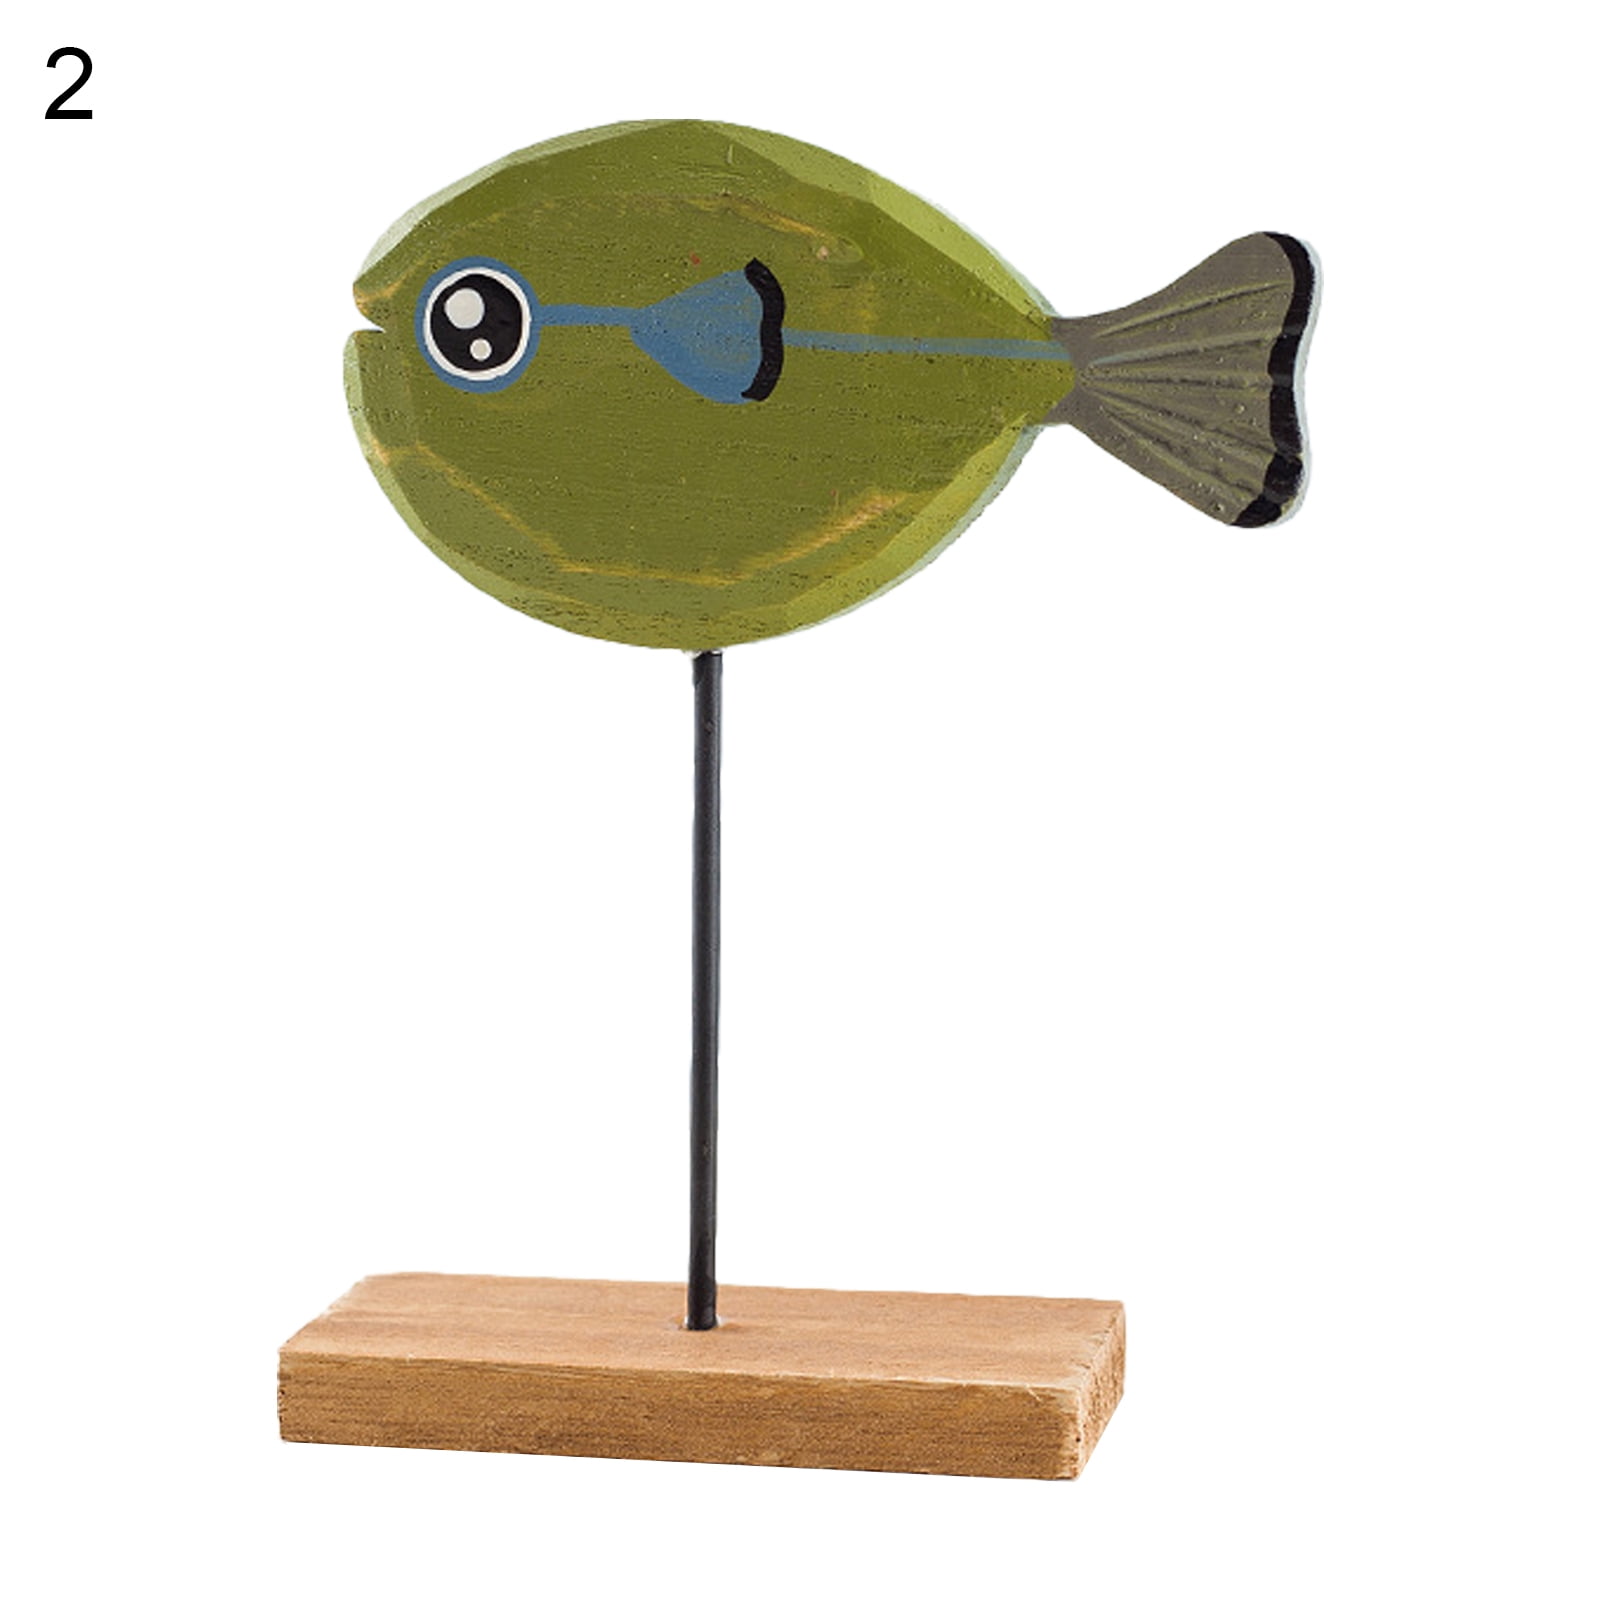 Grandest Birch Fish Statue Exquisite Stable Wood Fish Table